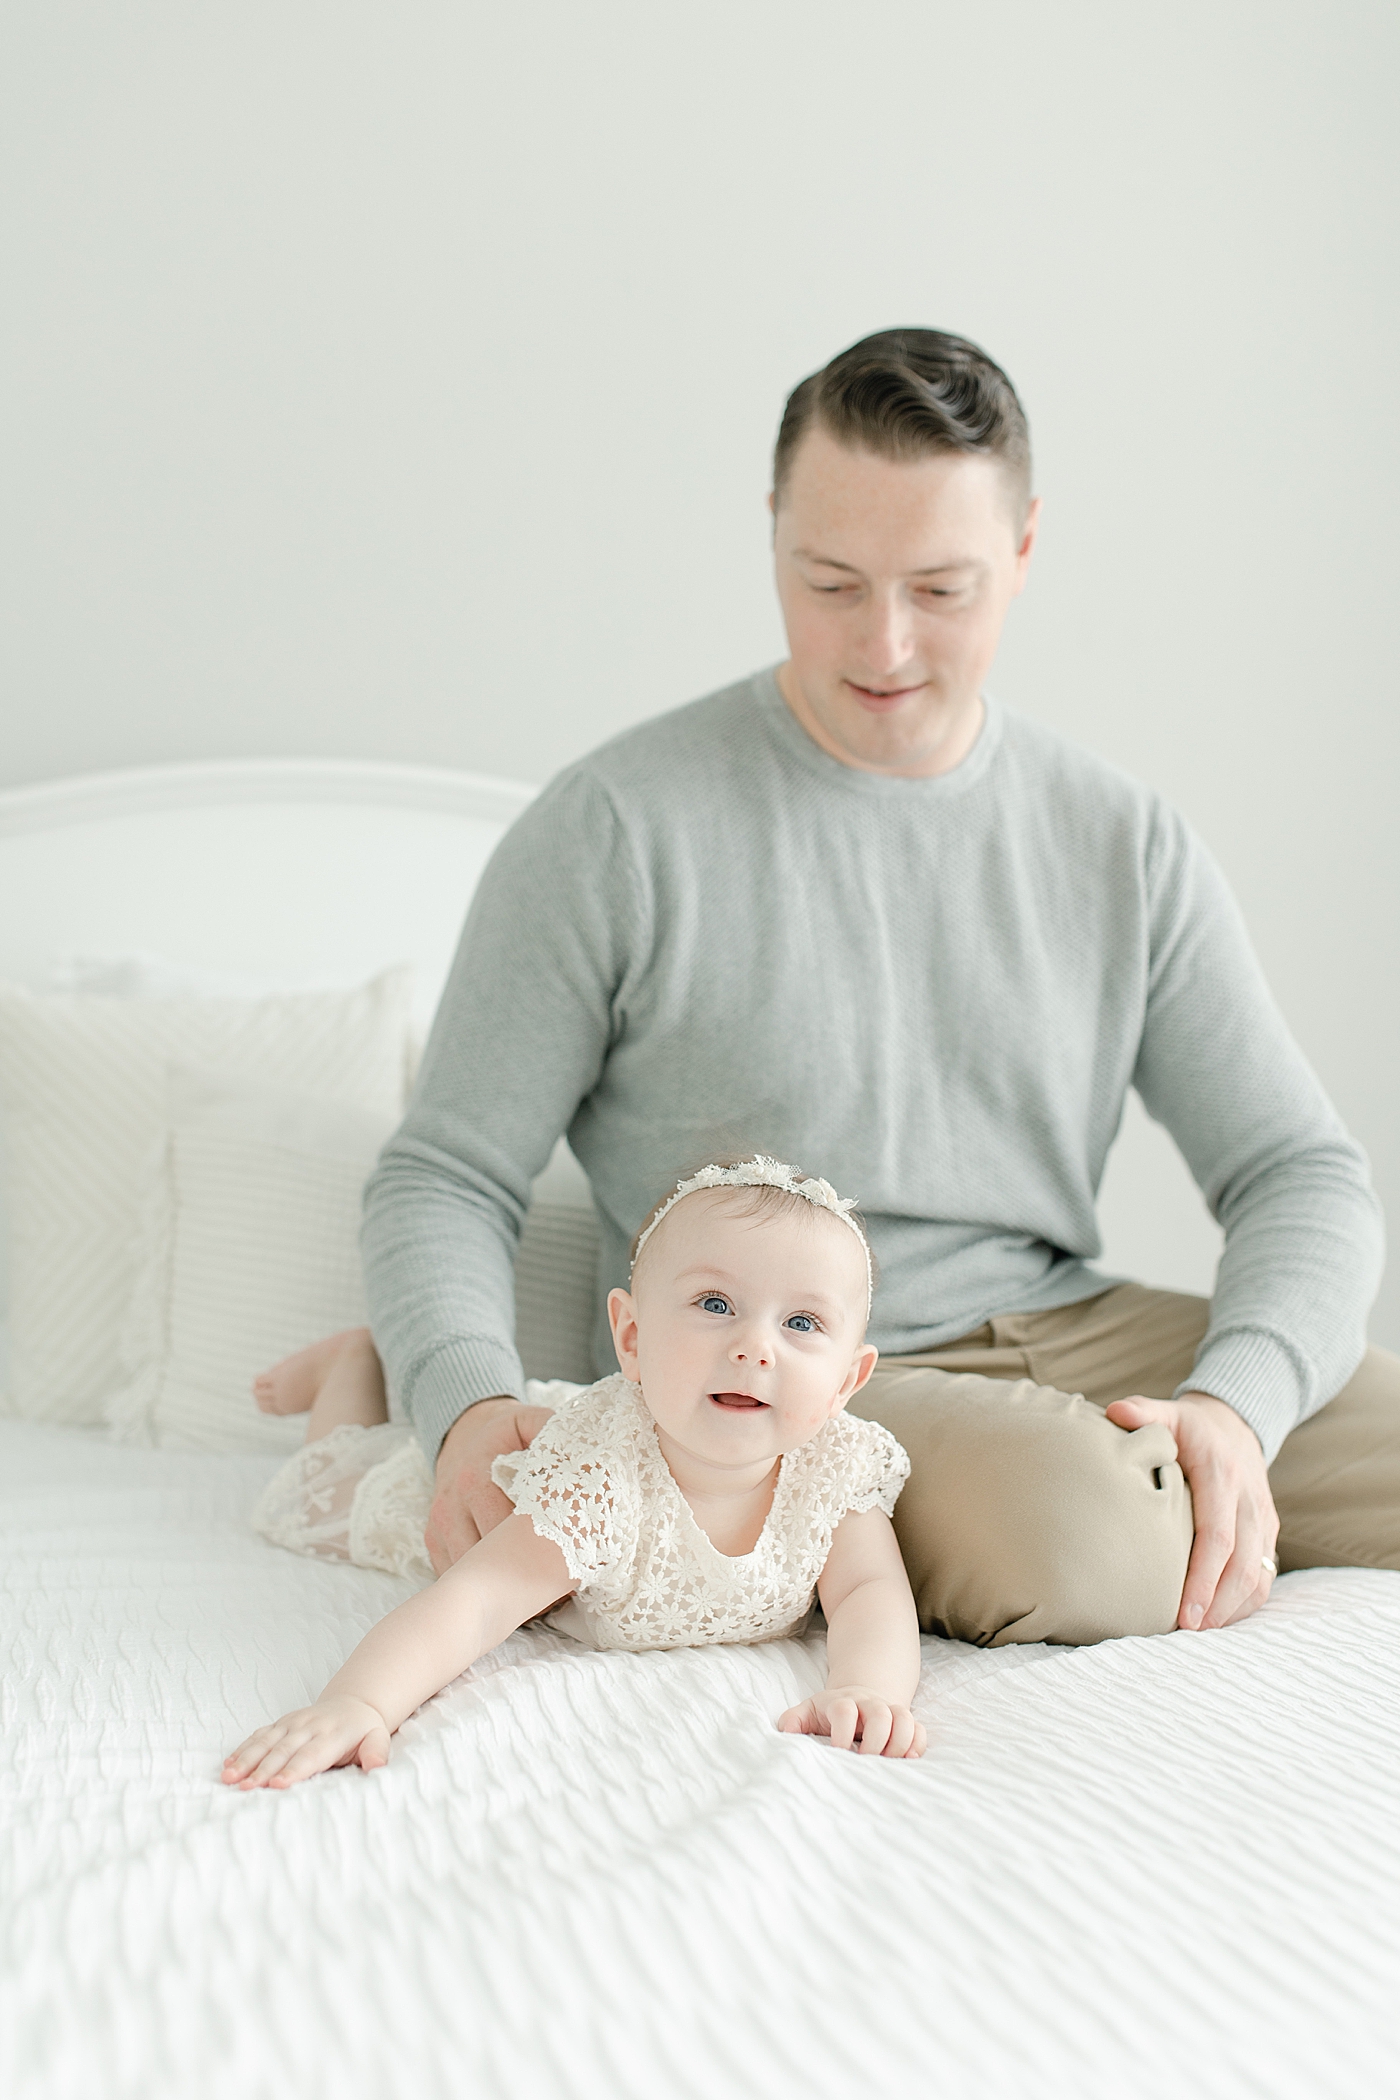 Dad sitting with his baby girl on a white bed | Photo by Little Sunshine Photography